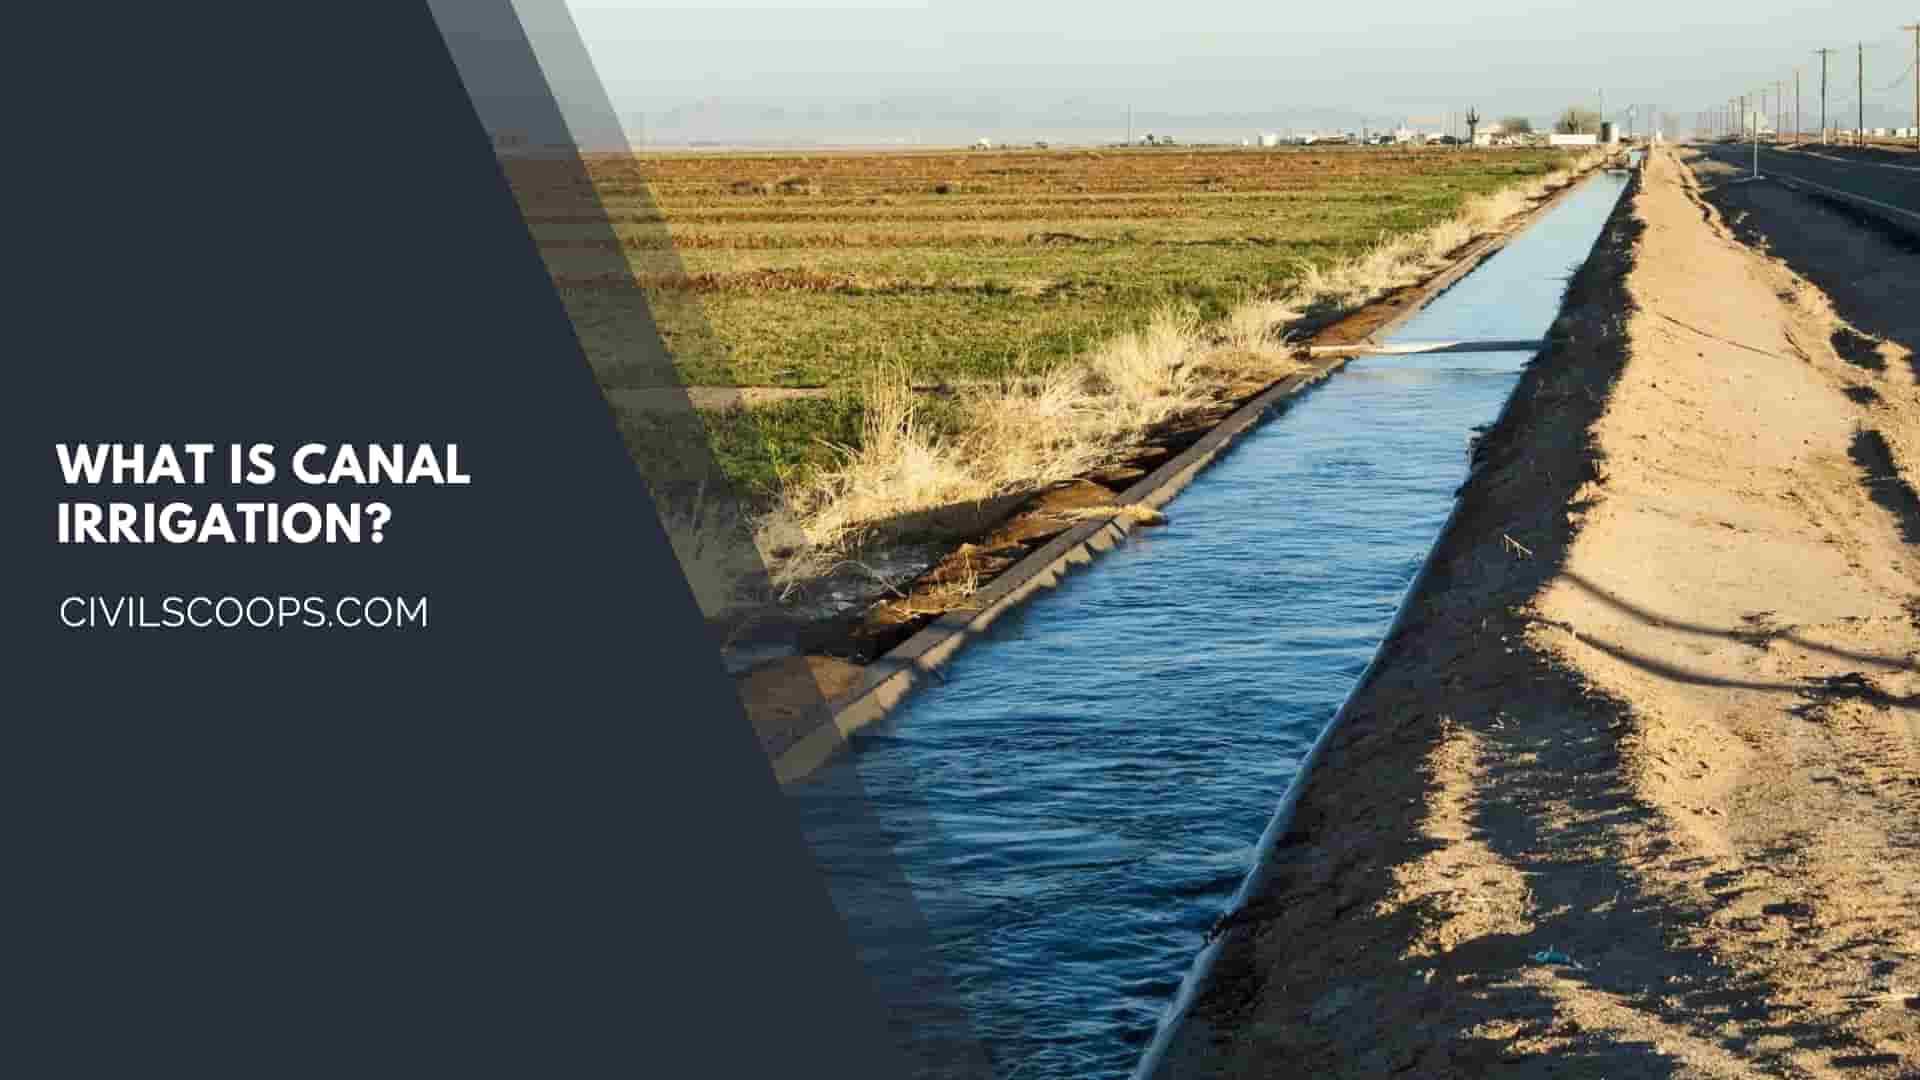 What Is Canal Irrigation?